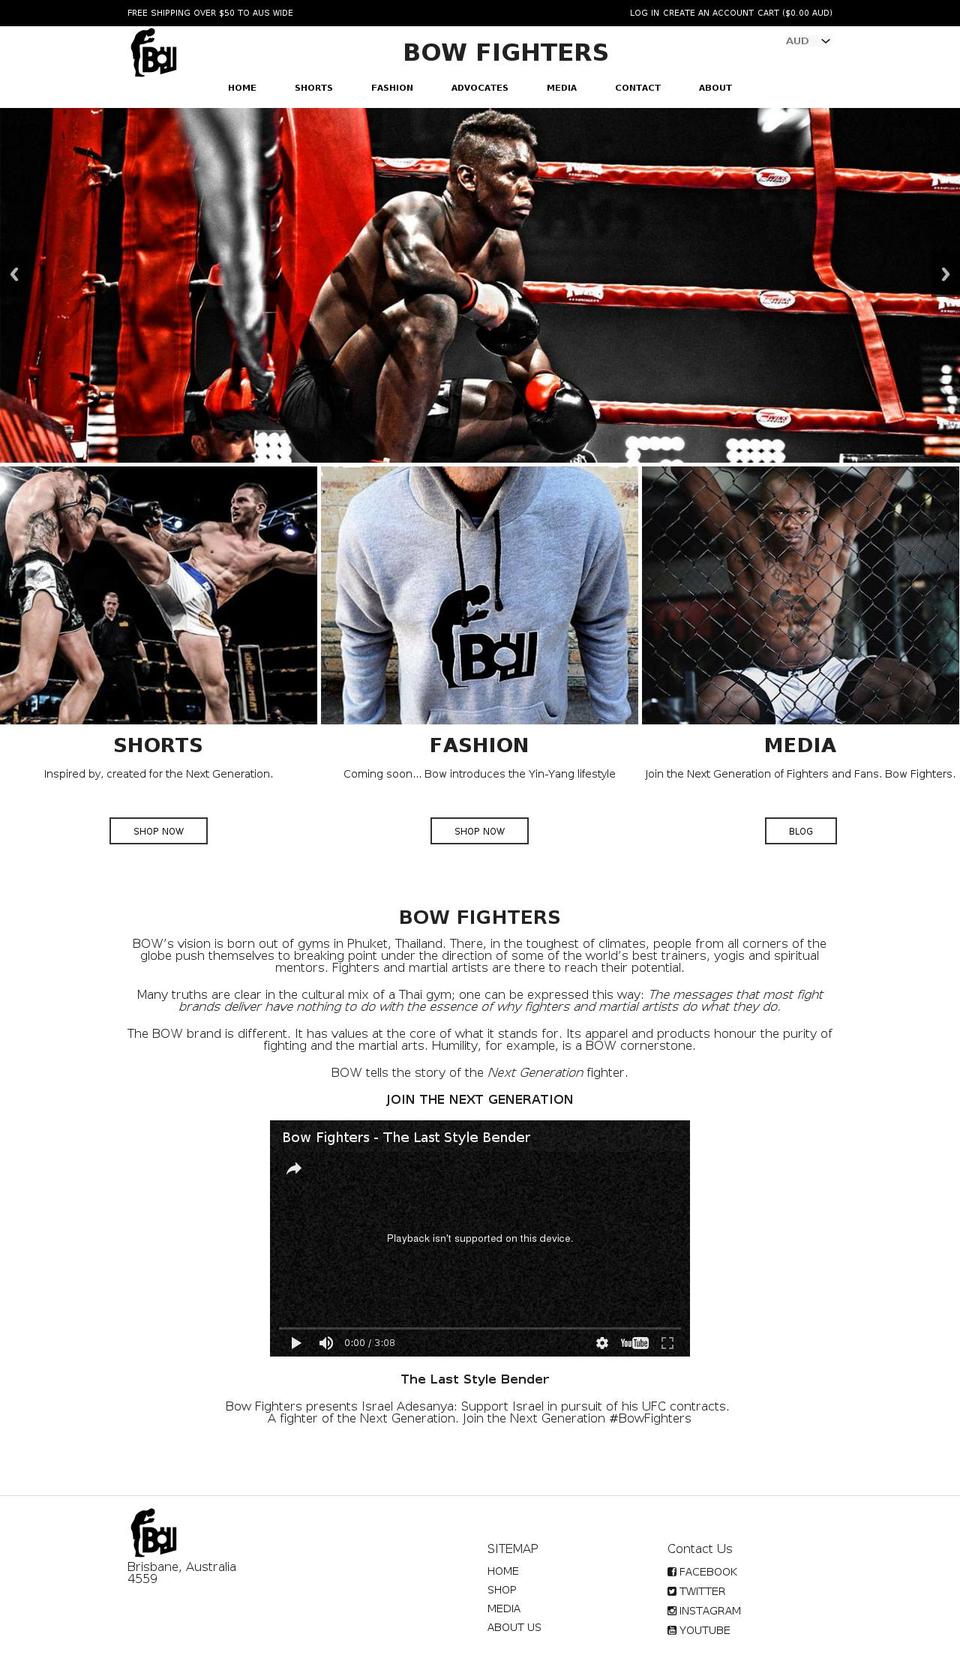 live theme Shopify theme site example bowfighters.com